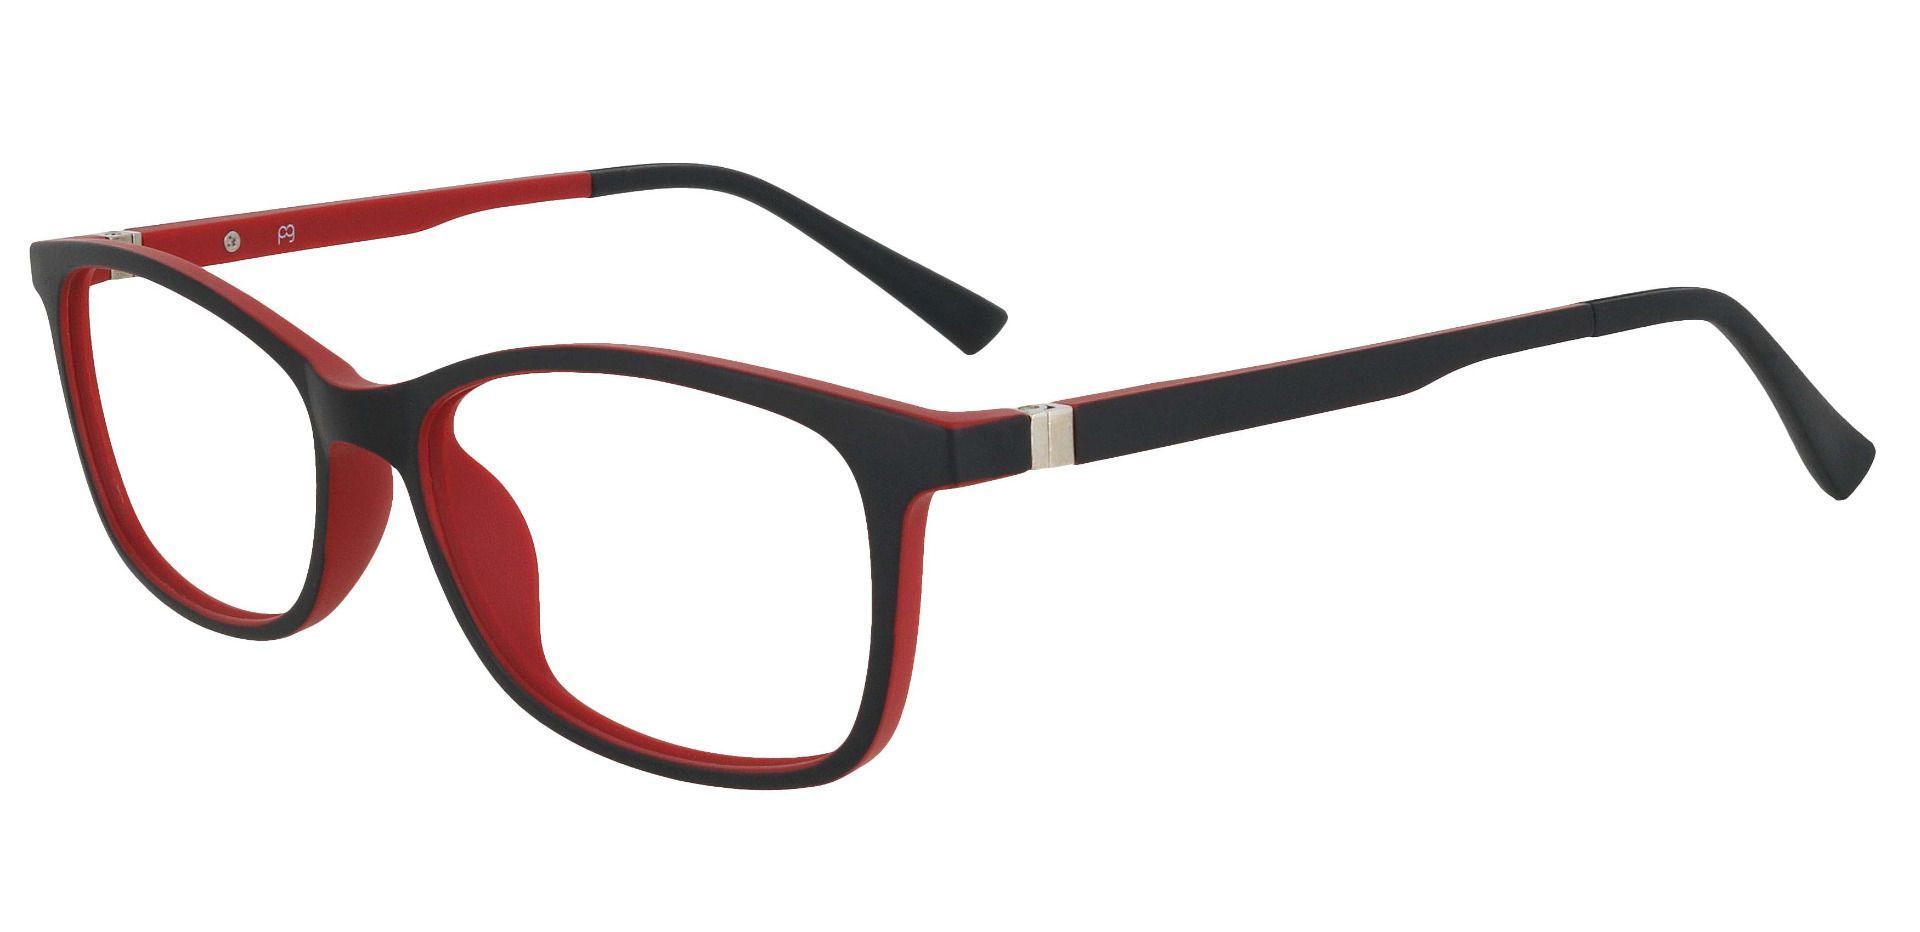 Segura Oval Lined Bifocal Glasses - Red